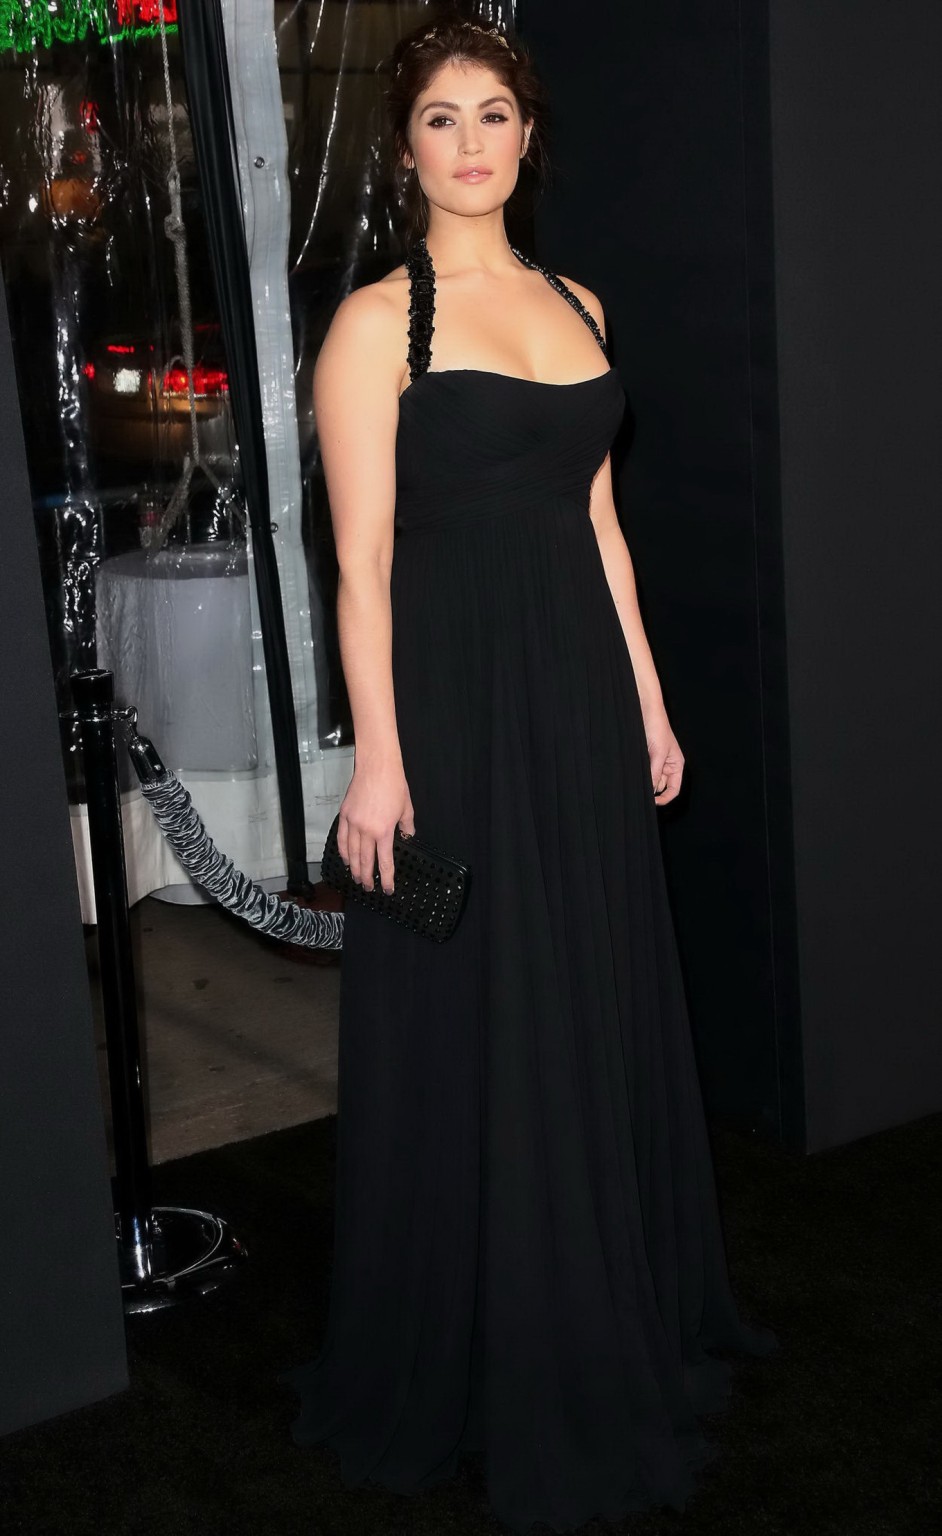 Gemma arterton busting out in a black backless dress at witch hunters premiere i
 #75242789